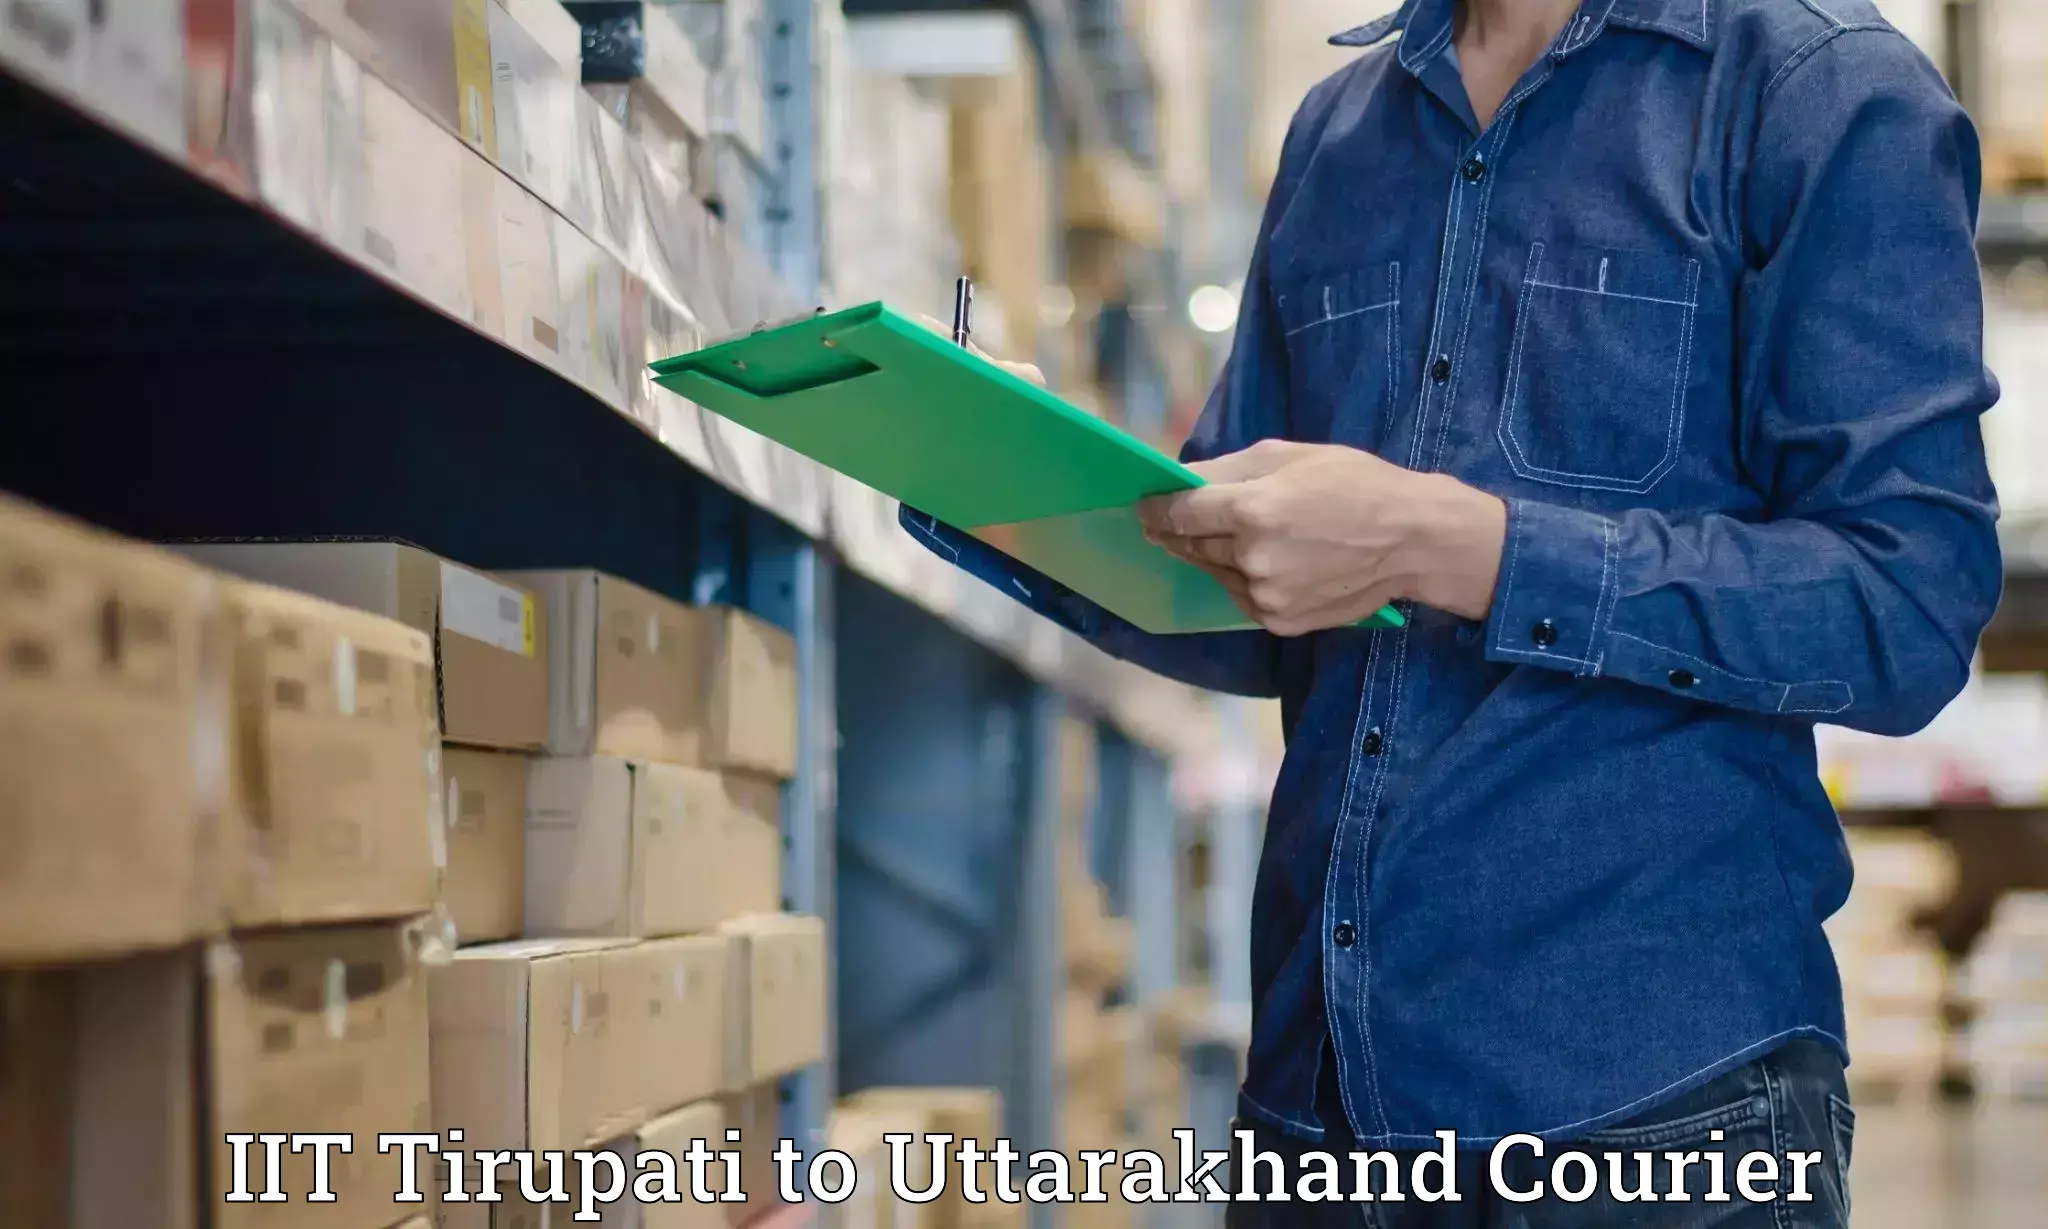 Personal courier services IIT Tirupati to Almora